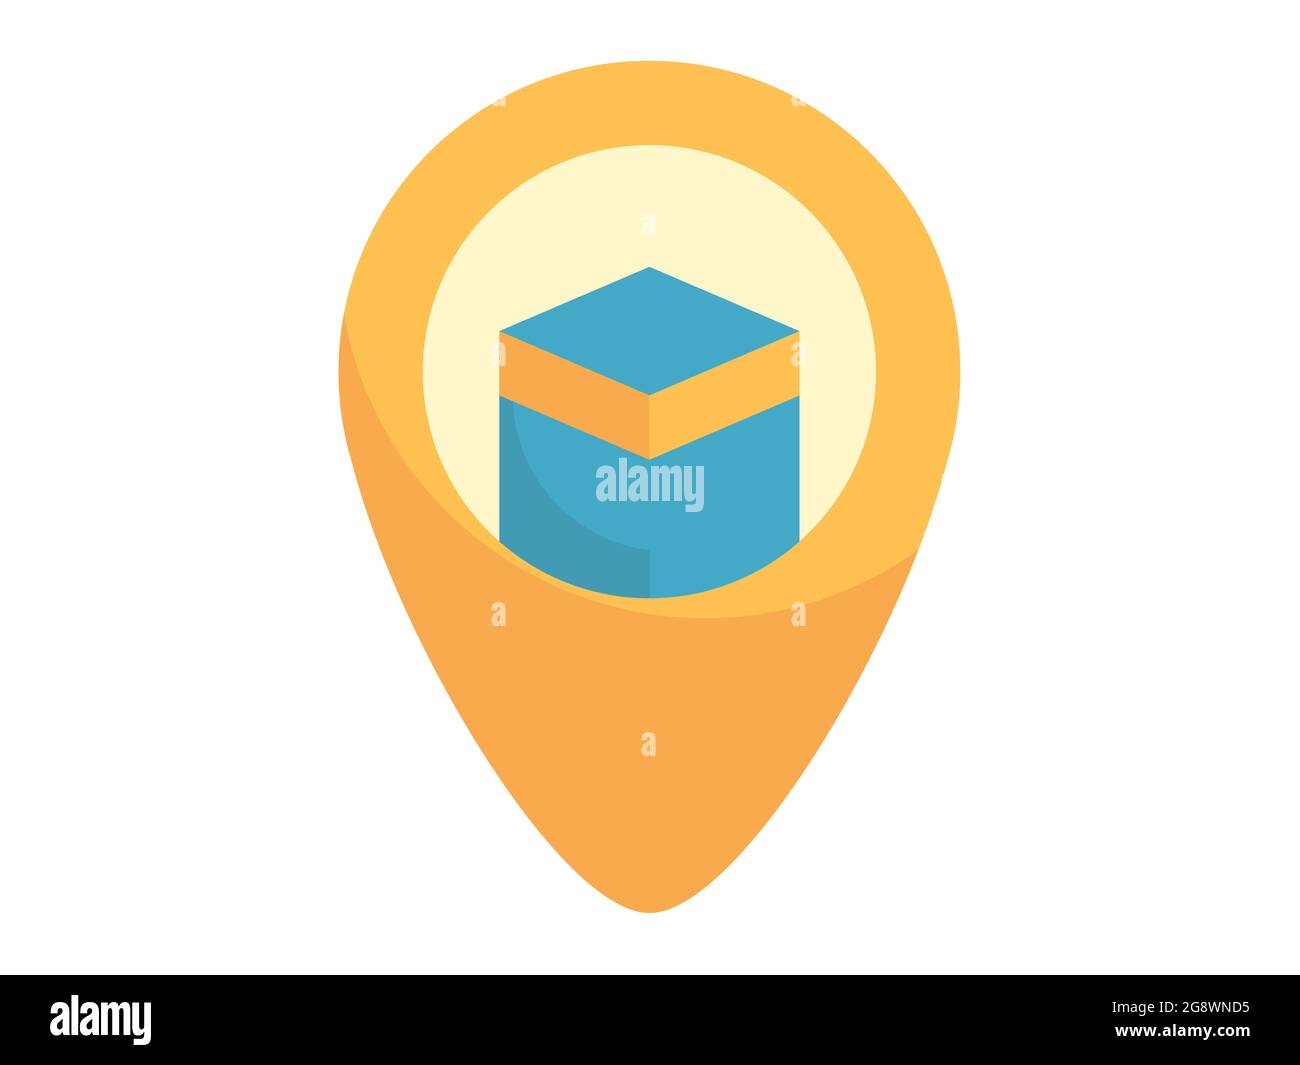 kaba mecca pin location single isolated icon with flat style vector illustration Stock Photo